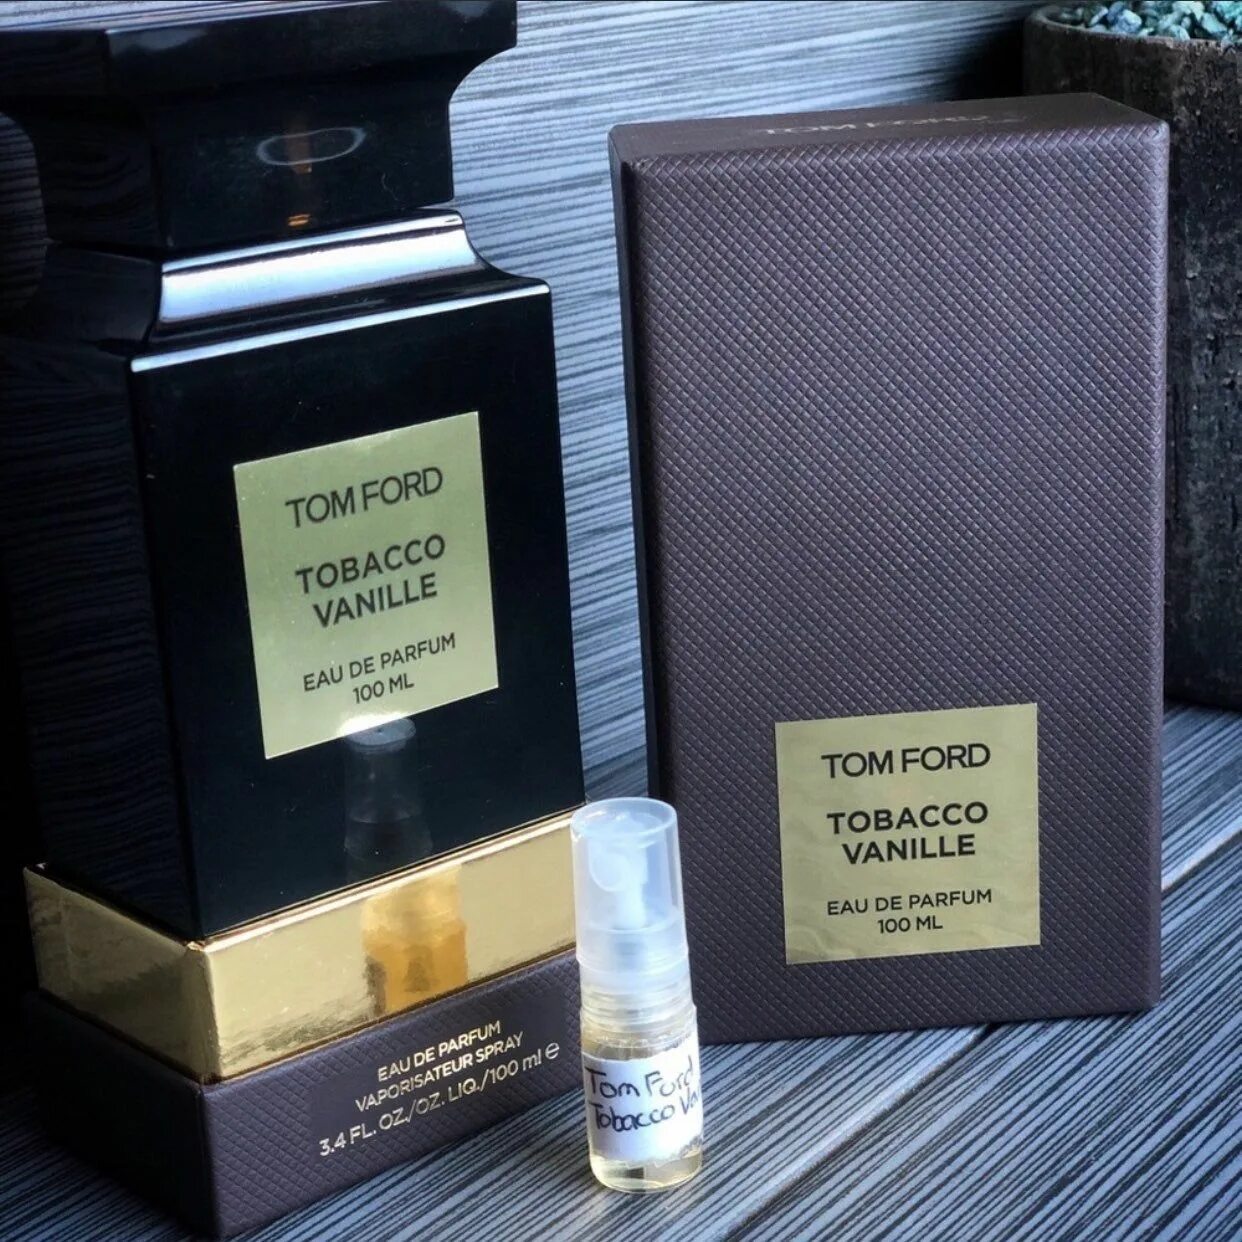 Том Форд табако ваниль 100 мл. Том Форд табако ваниль 40мл. Tom Ford Vanille Fatale 100 мл. Tom Ford Tabacco Vanille pour homme 100 ml EDP Tester 100 ml.